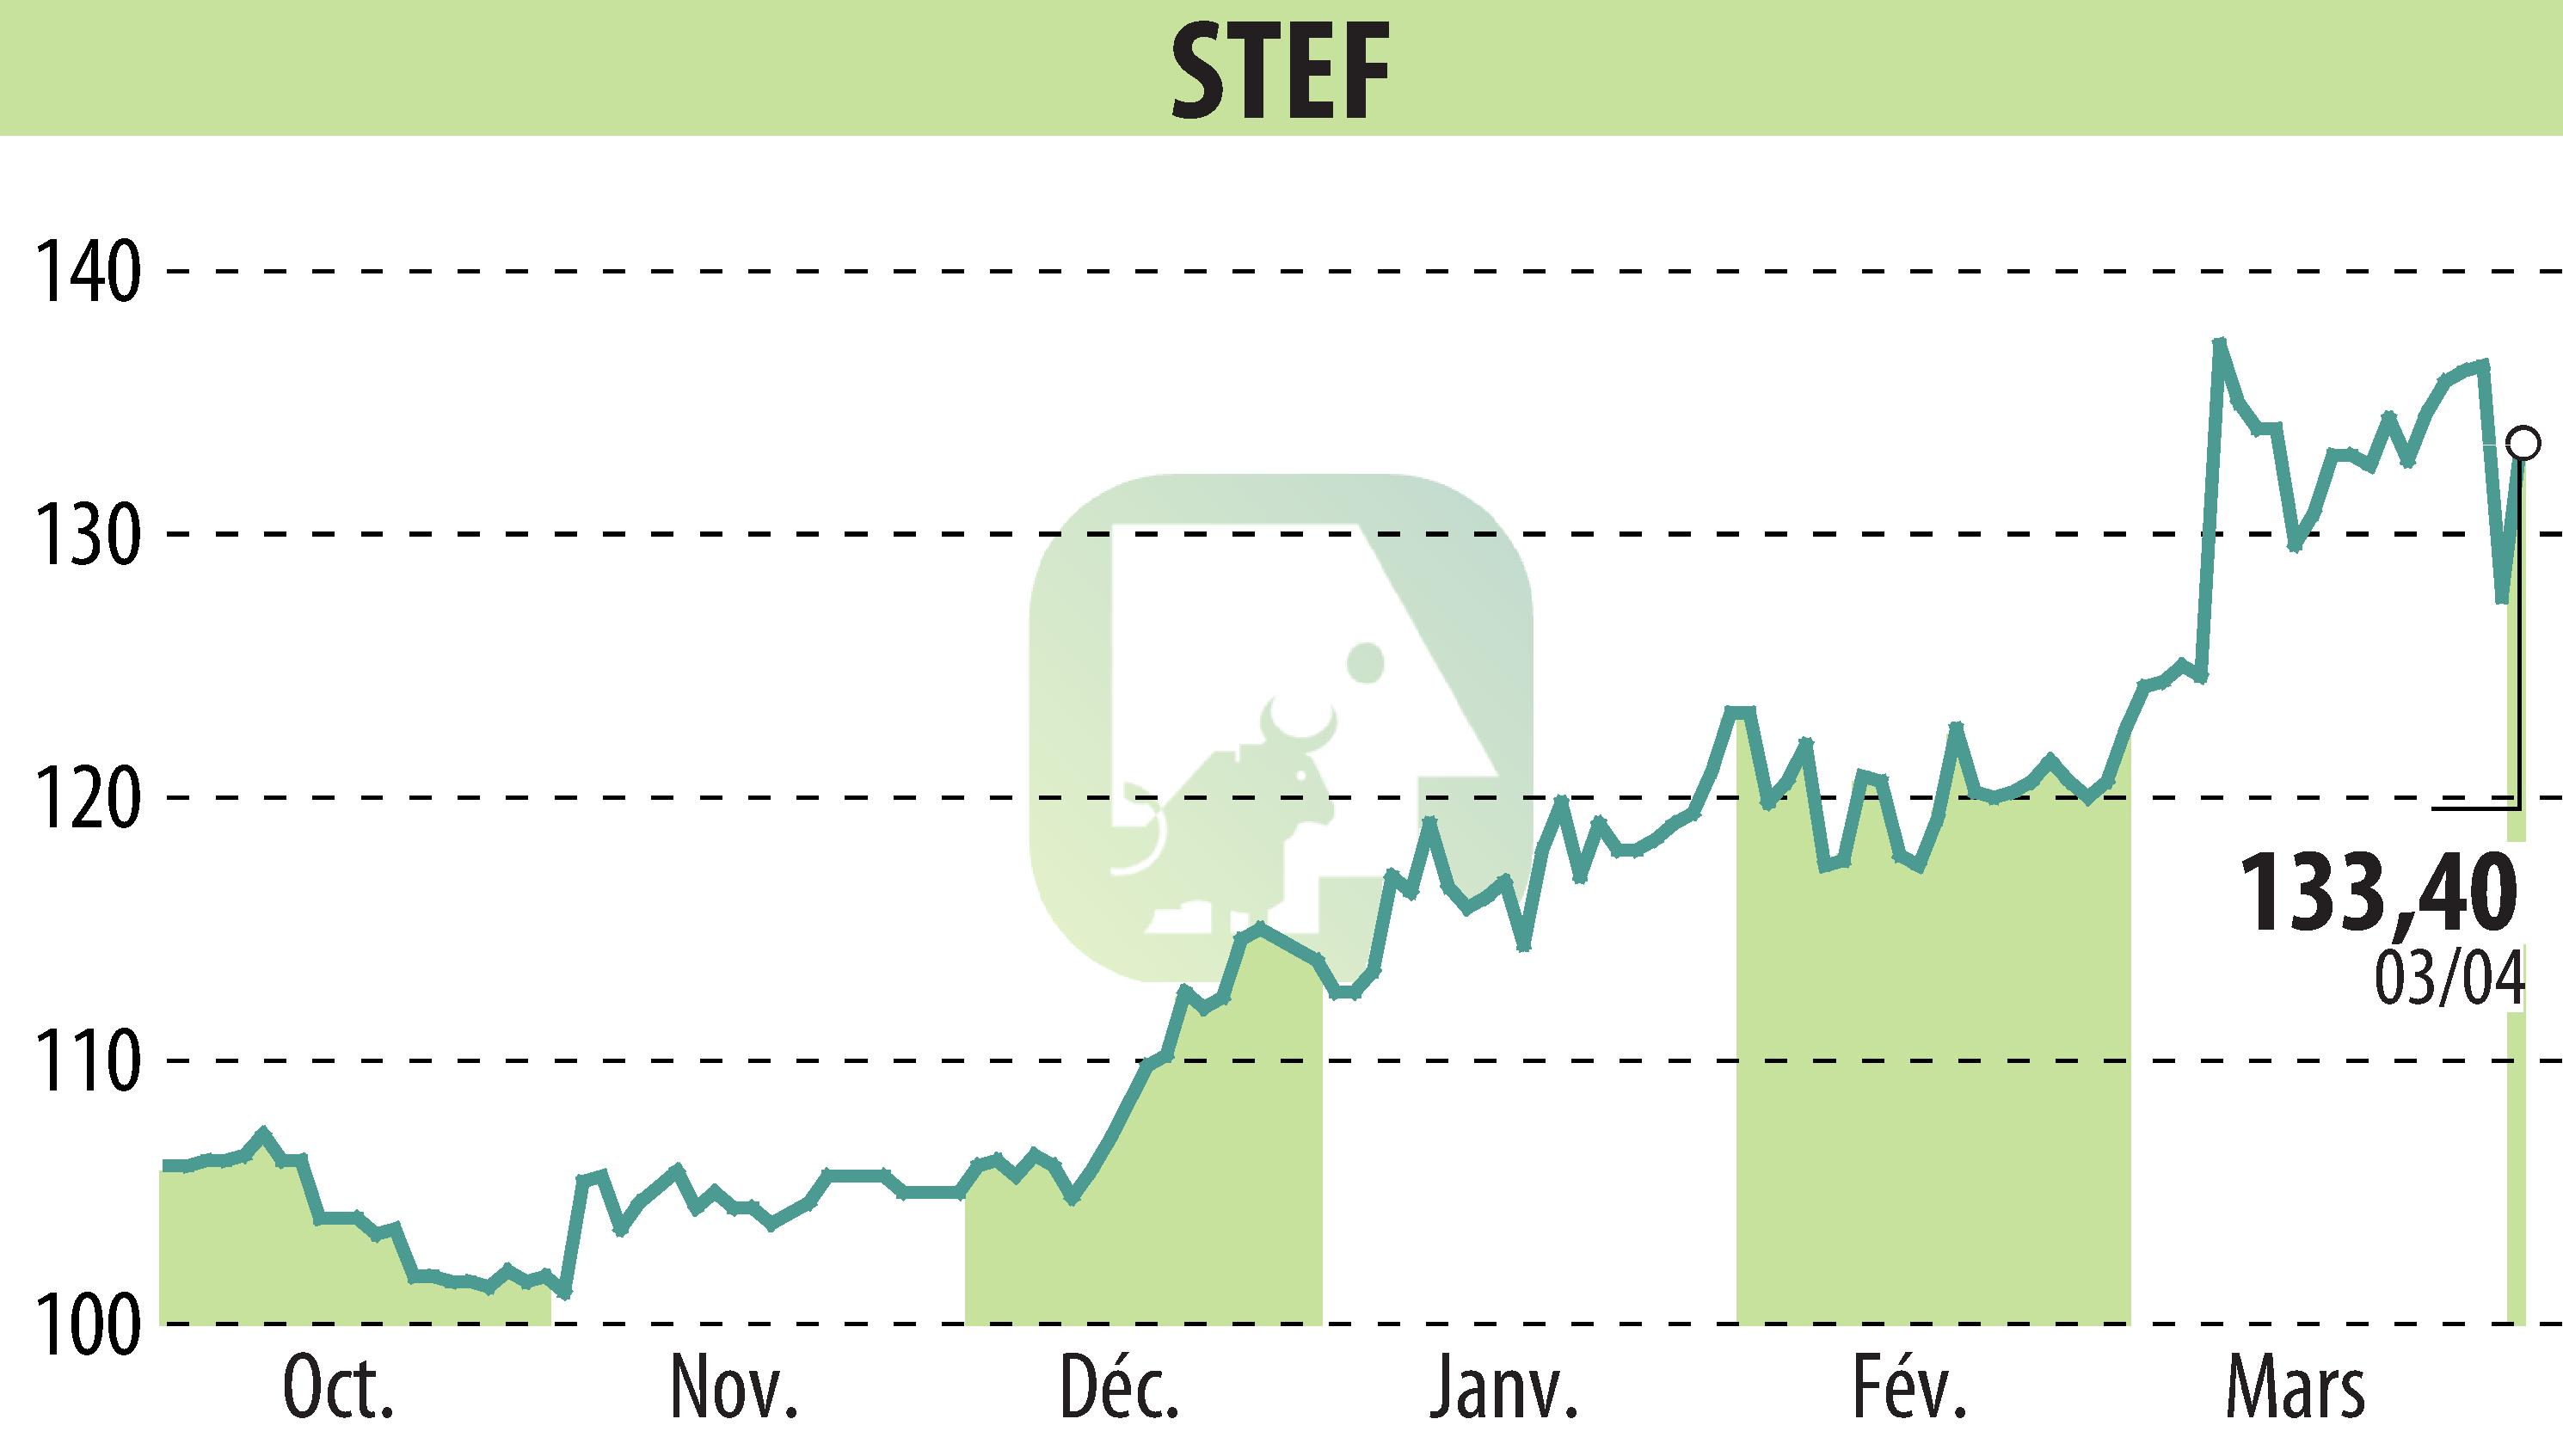 Stock price chart of STEF (EPA:STF) showing fluctuations.